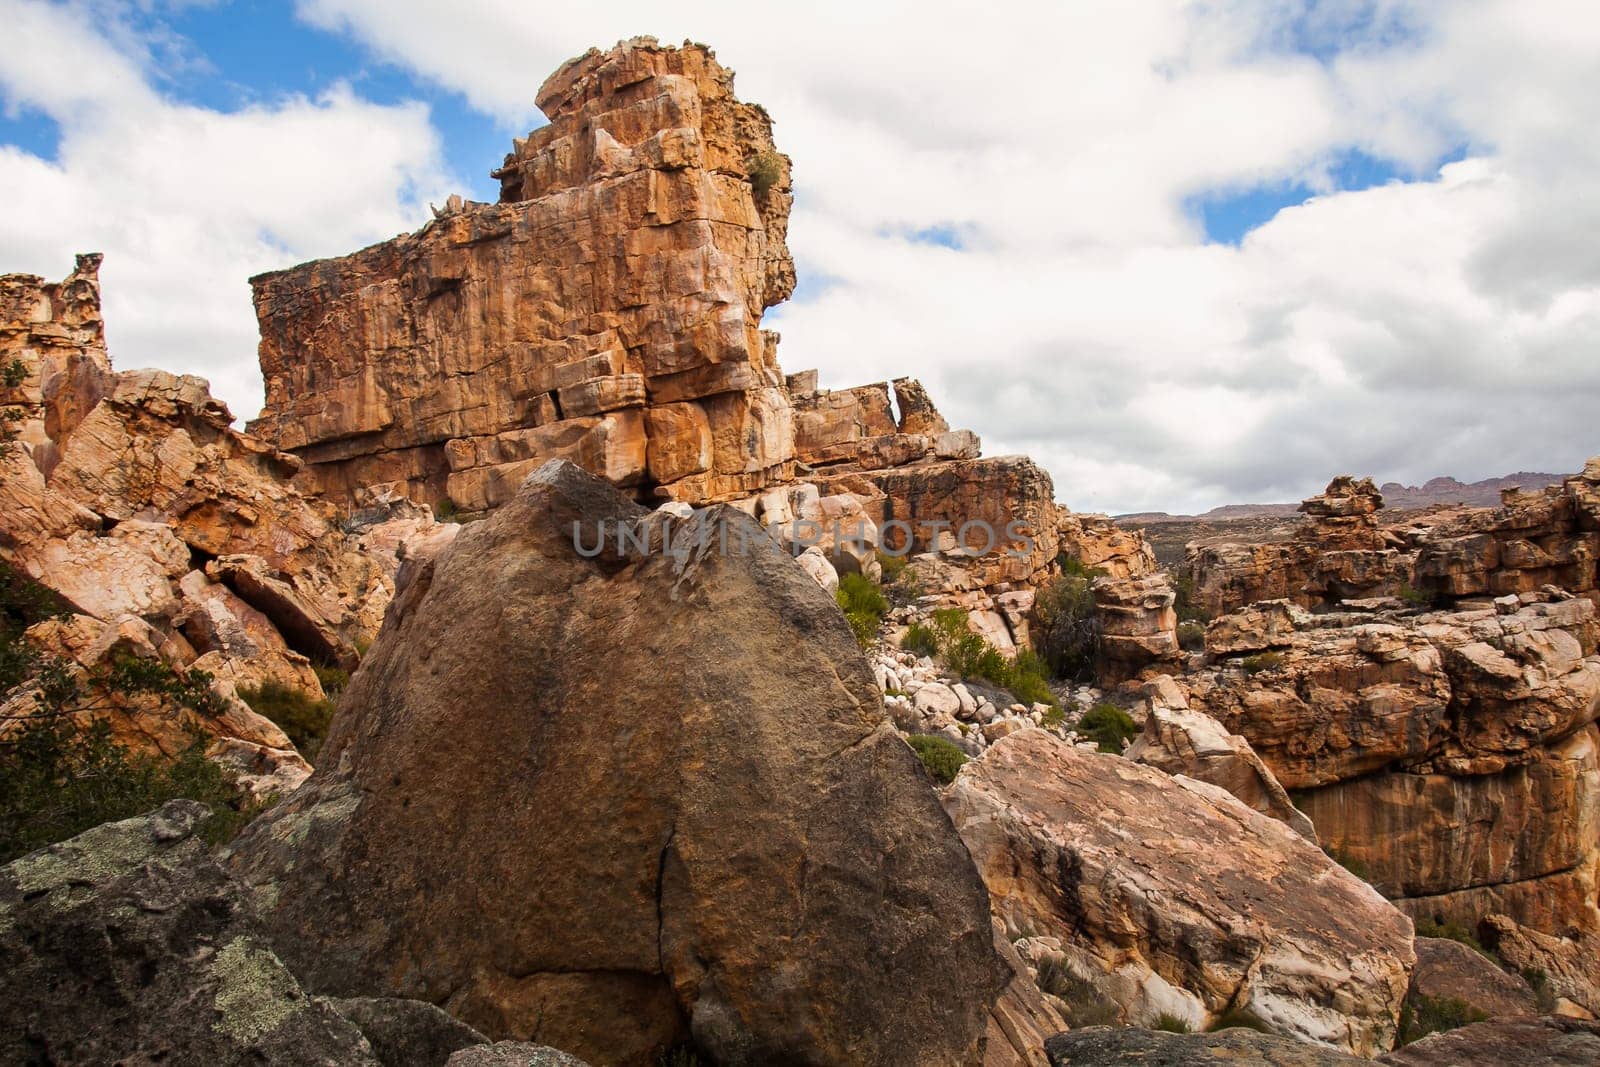 Cederberg Rock Formations 12880 by kobus_peche